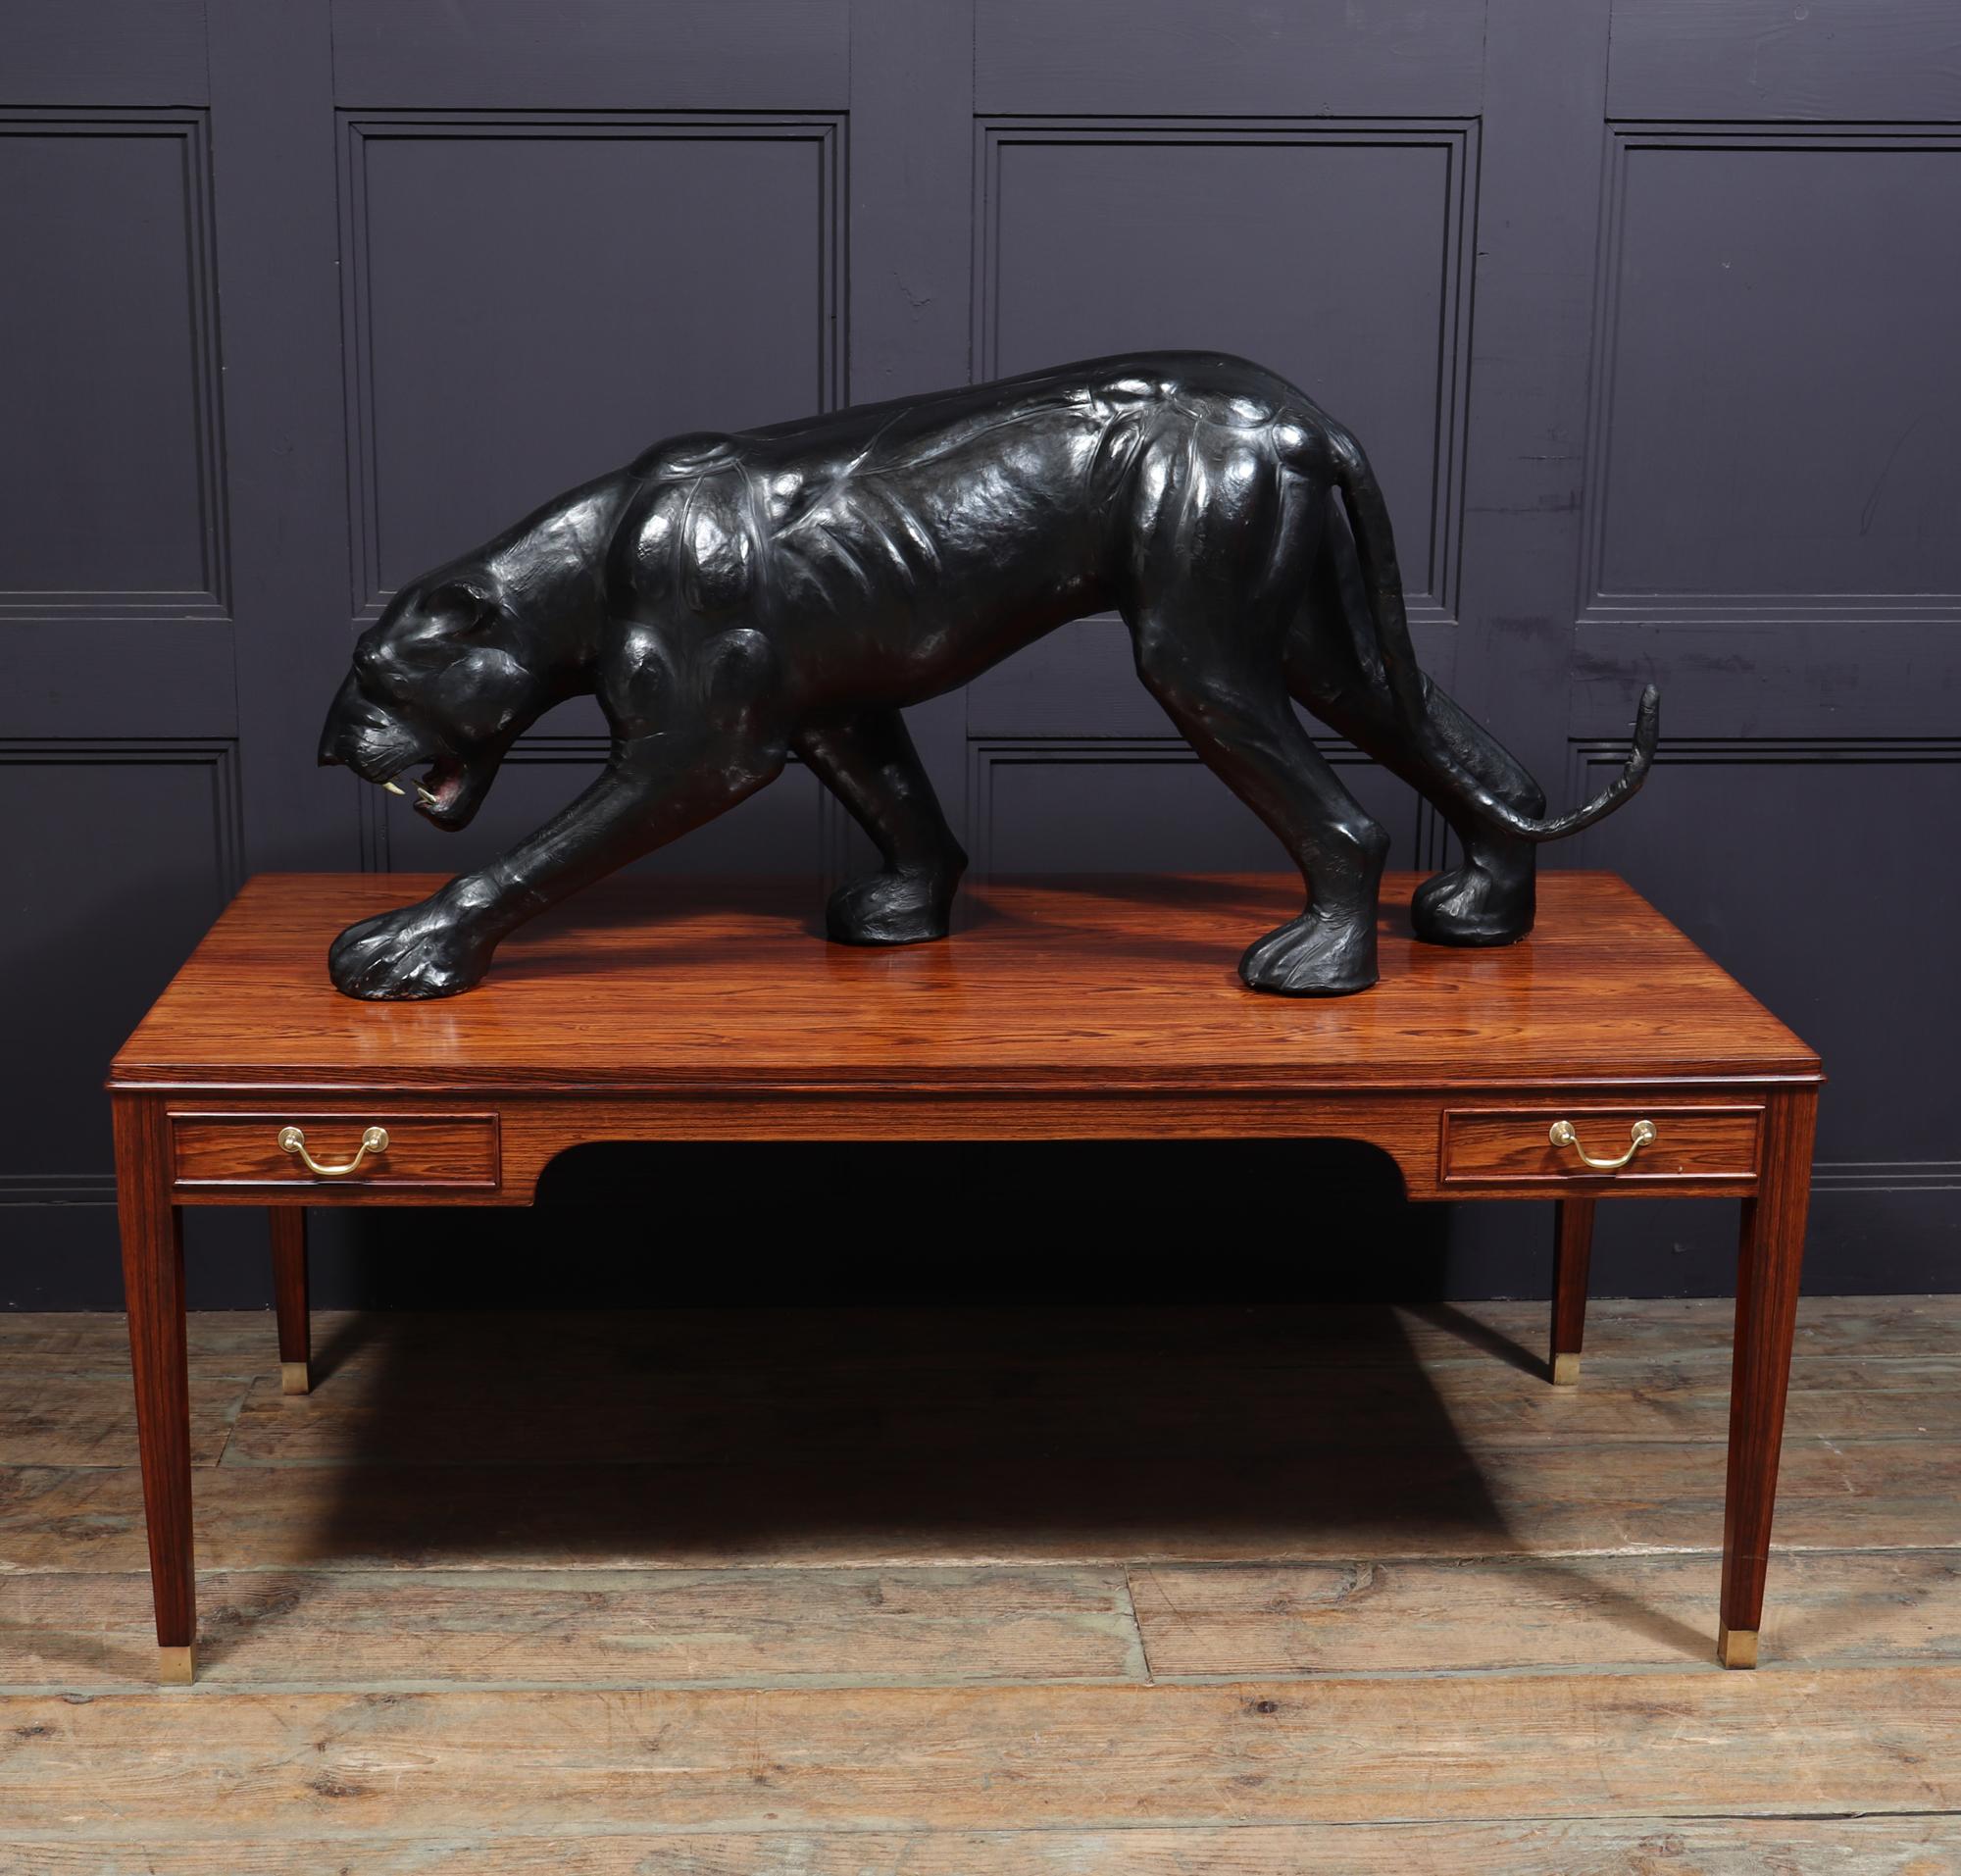 20th Century Large Leather Clad Panther Sculpture For Sale